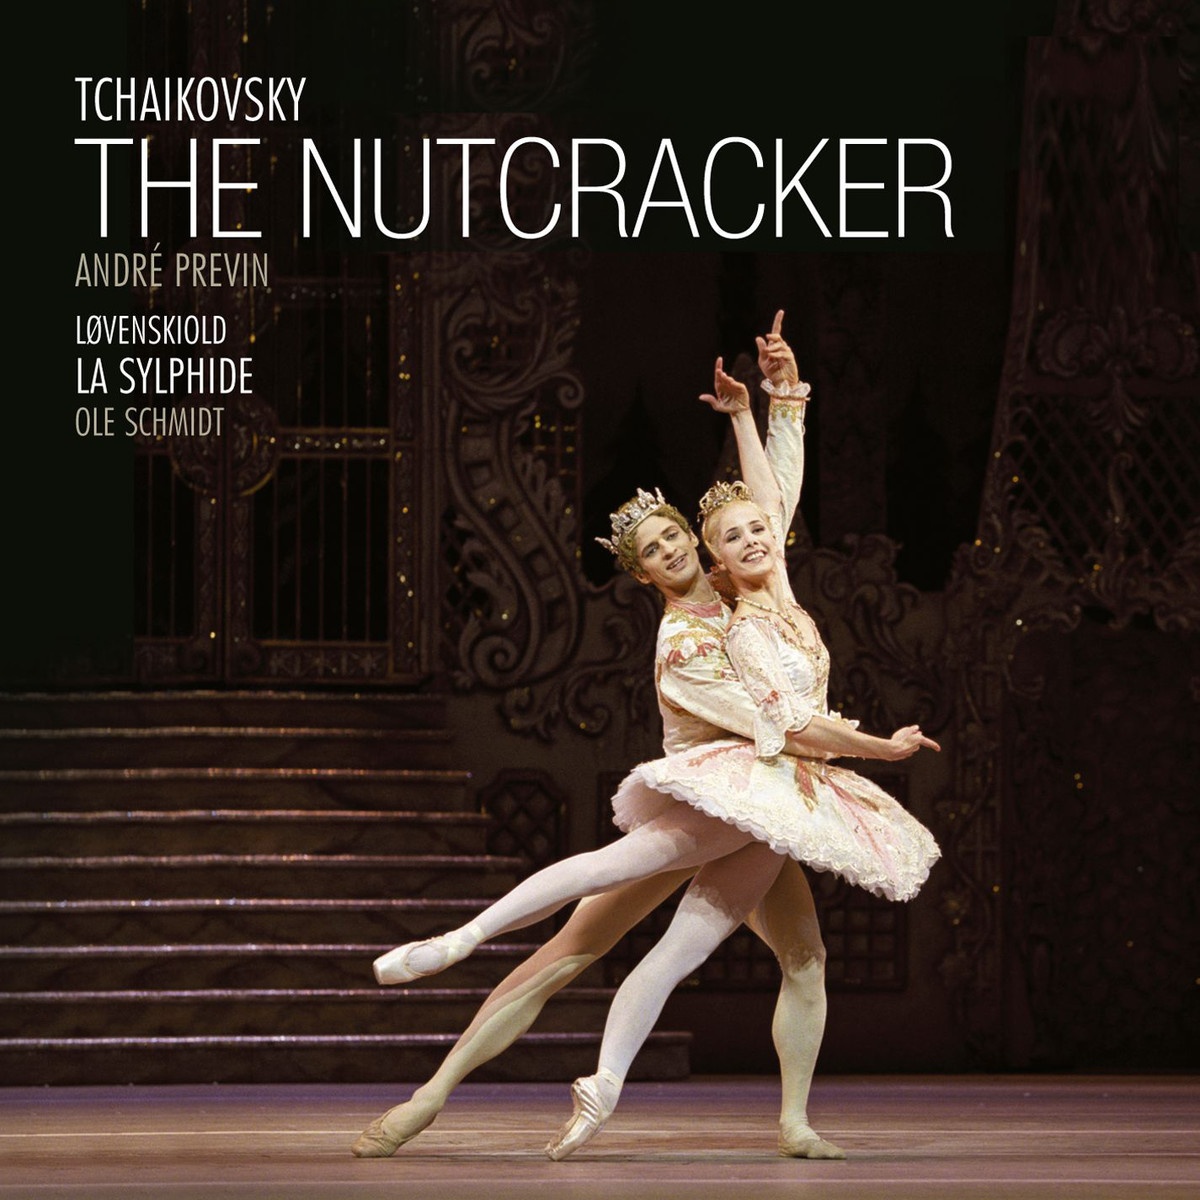 The Nutcracker - Ballet in two acts Op. 71, Act II: Confiturembourg (The Kingdom of Sweets)